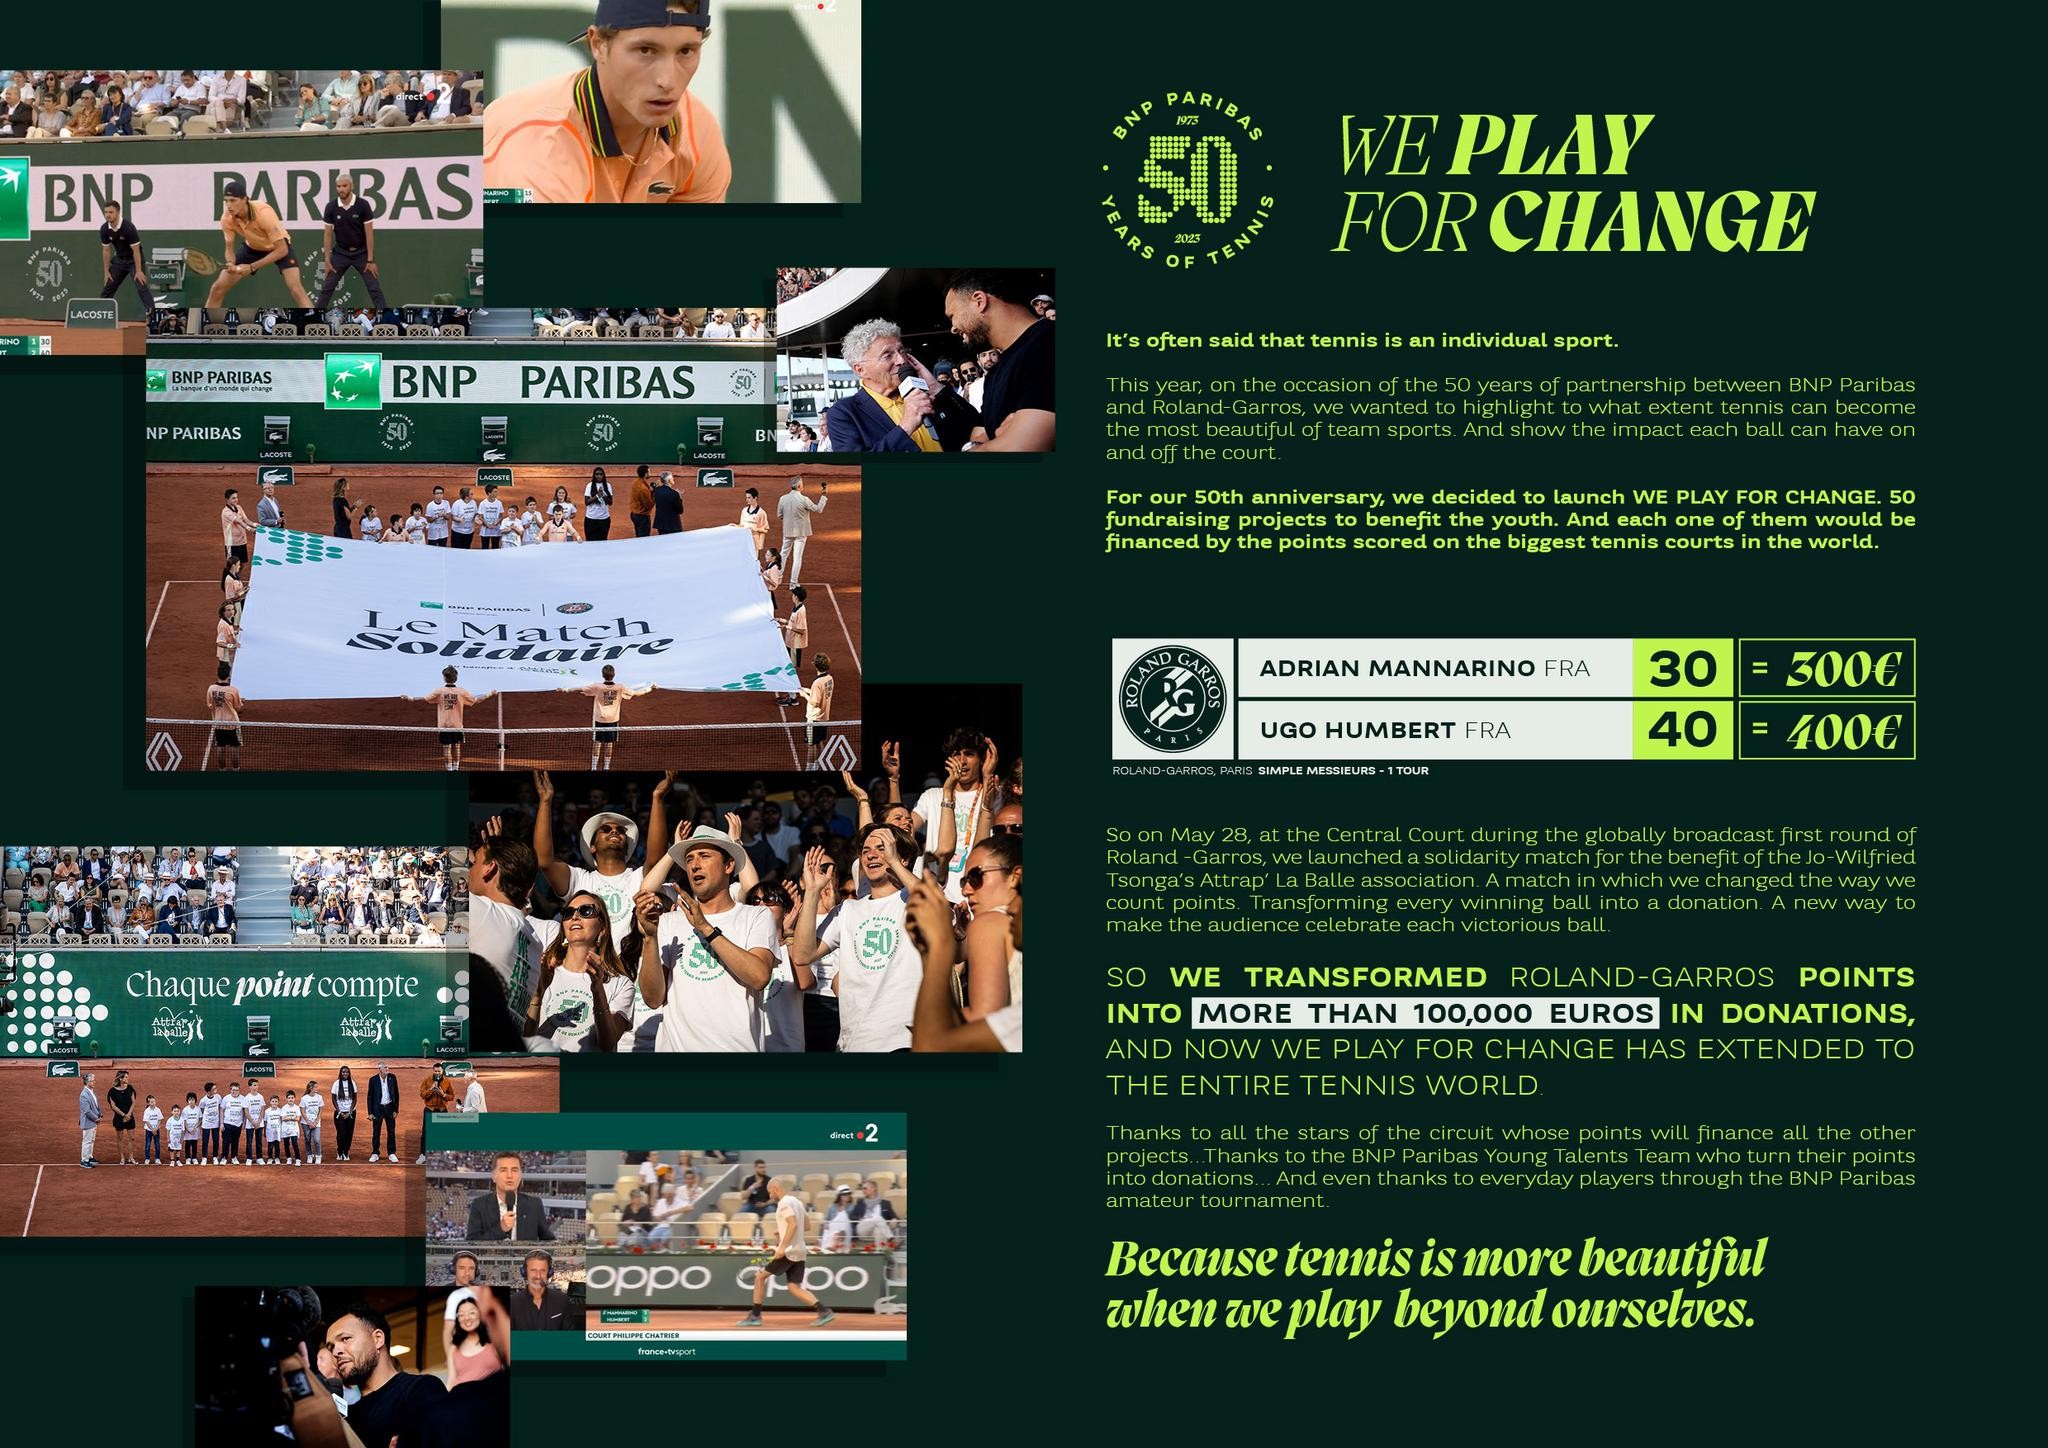  We Play For Change - BNP Paribas